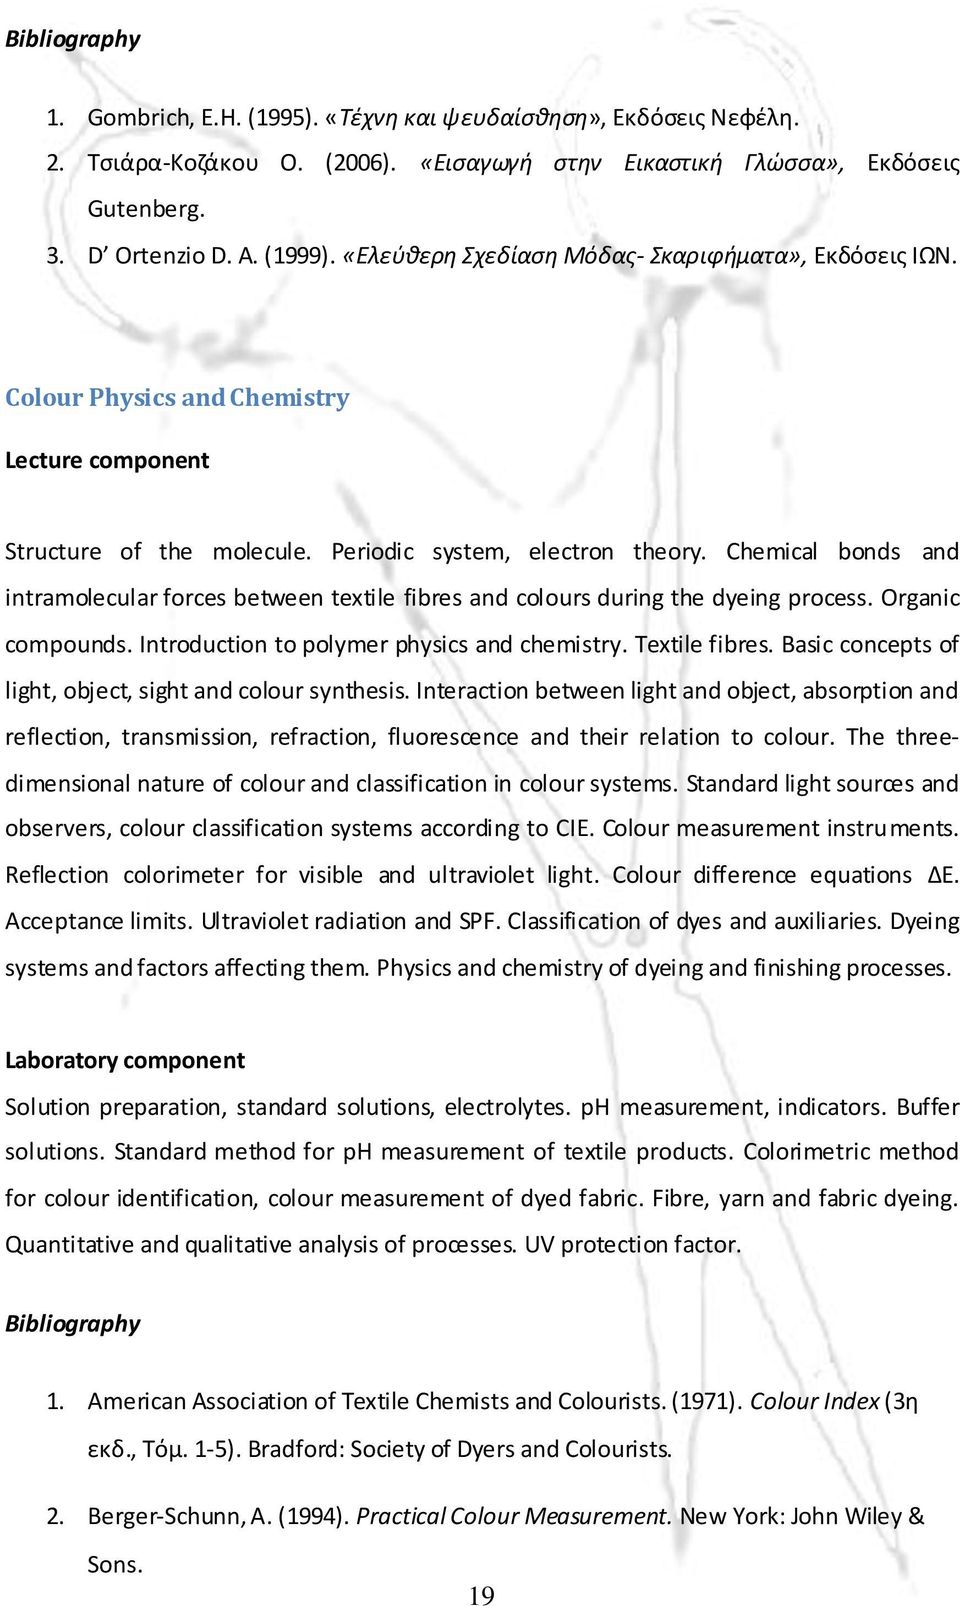 Chemical bonds and intramolecular forces between textile fibres and colours during the dyeing process. Organic compounds. Introduction to polymer physics and chemistry. Textile fibres.